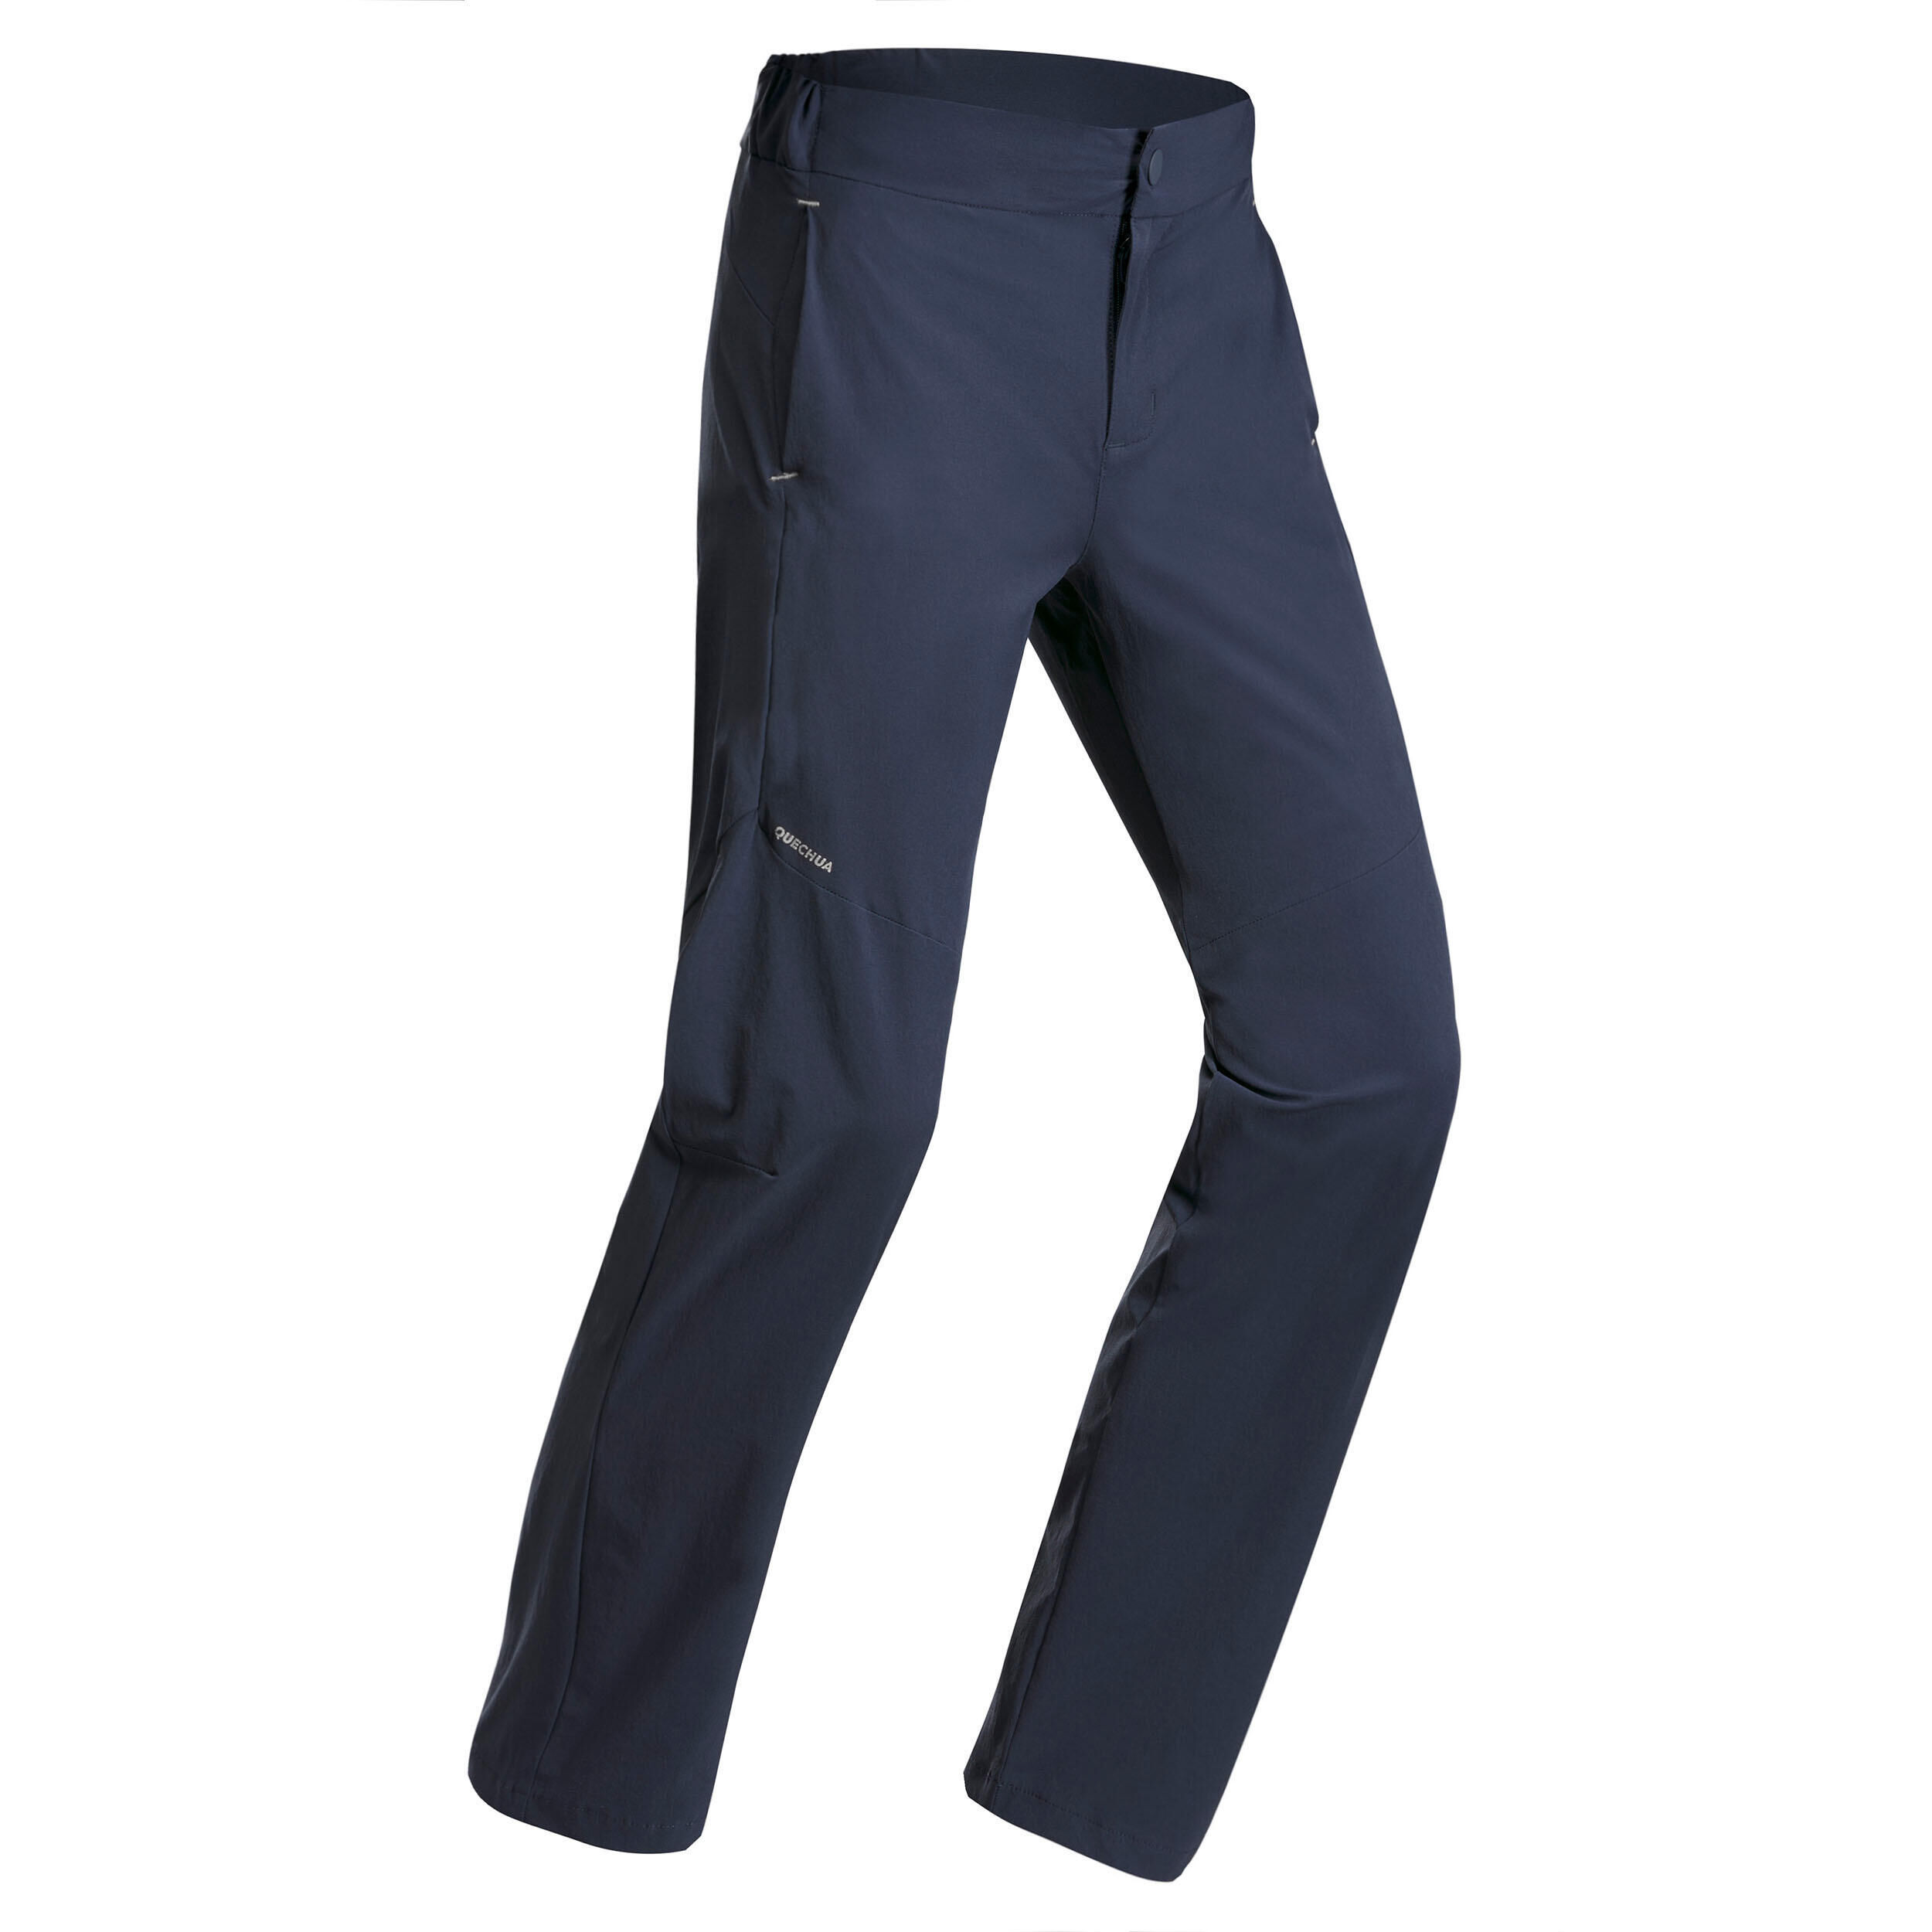 QUECHUA Kids’ Hiking Trousers - MH100 Aged 7-15 - Navy Blue